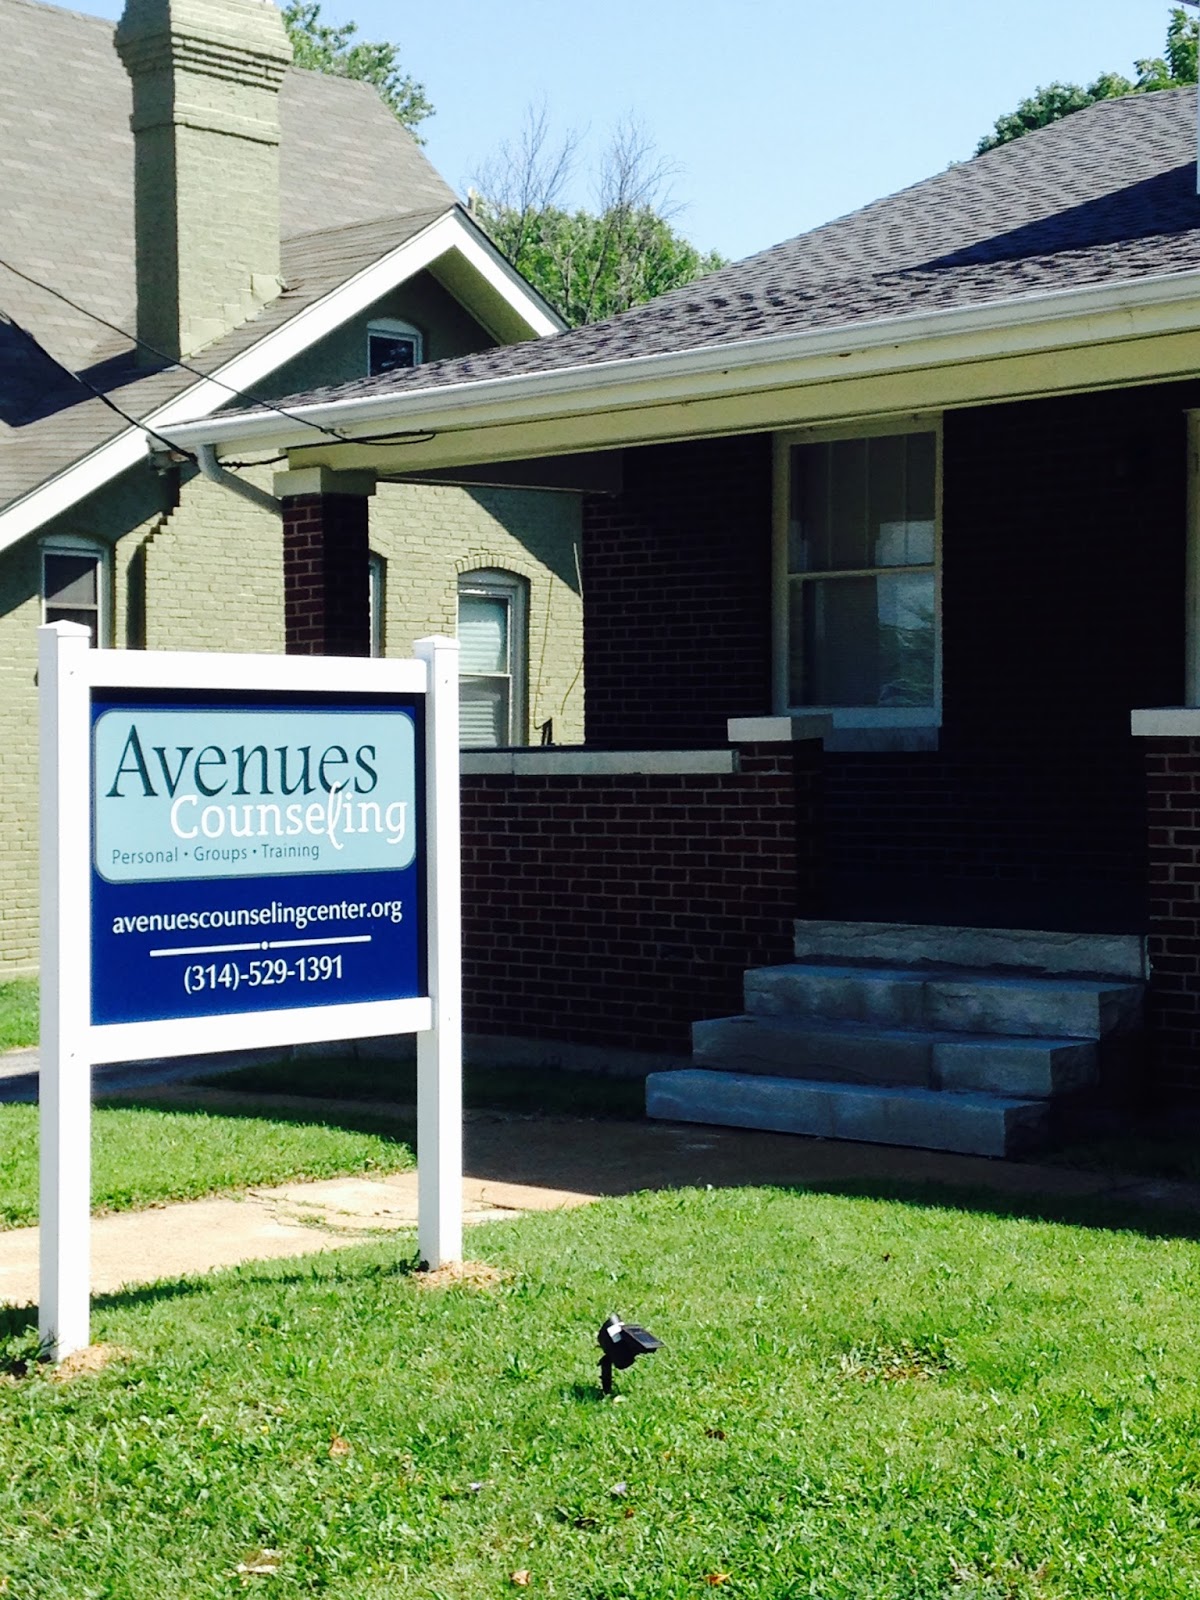 Avenues Counseling Center